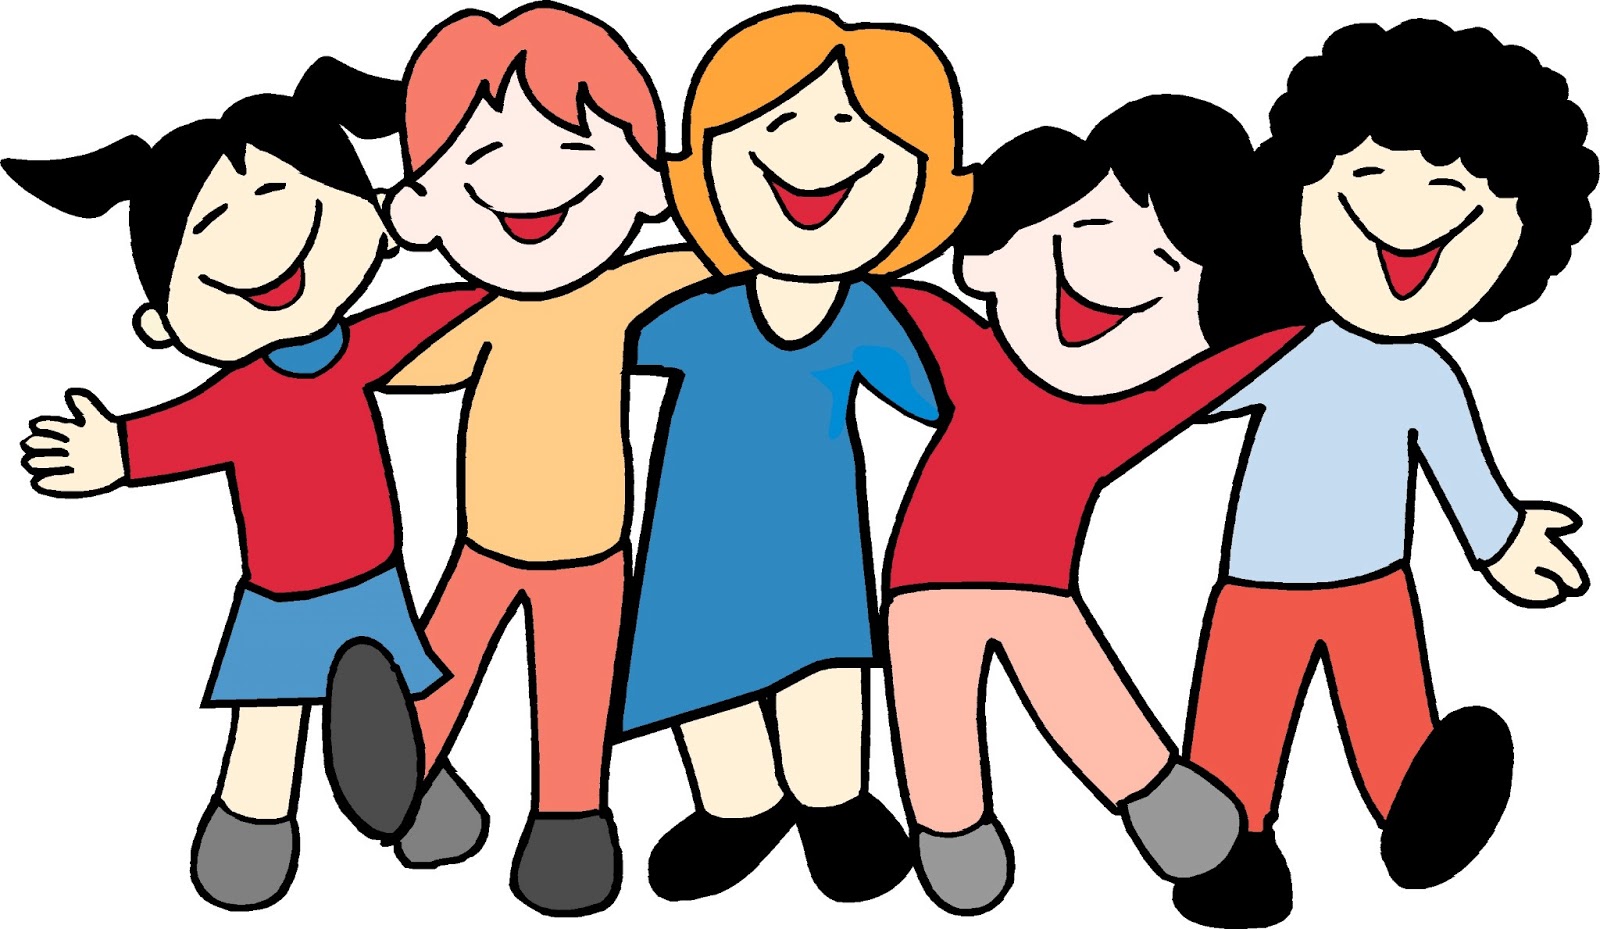 Friends laughing together clipart 